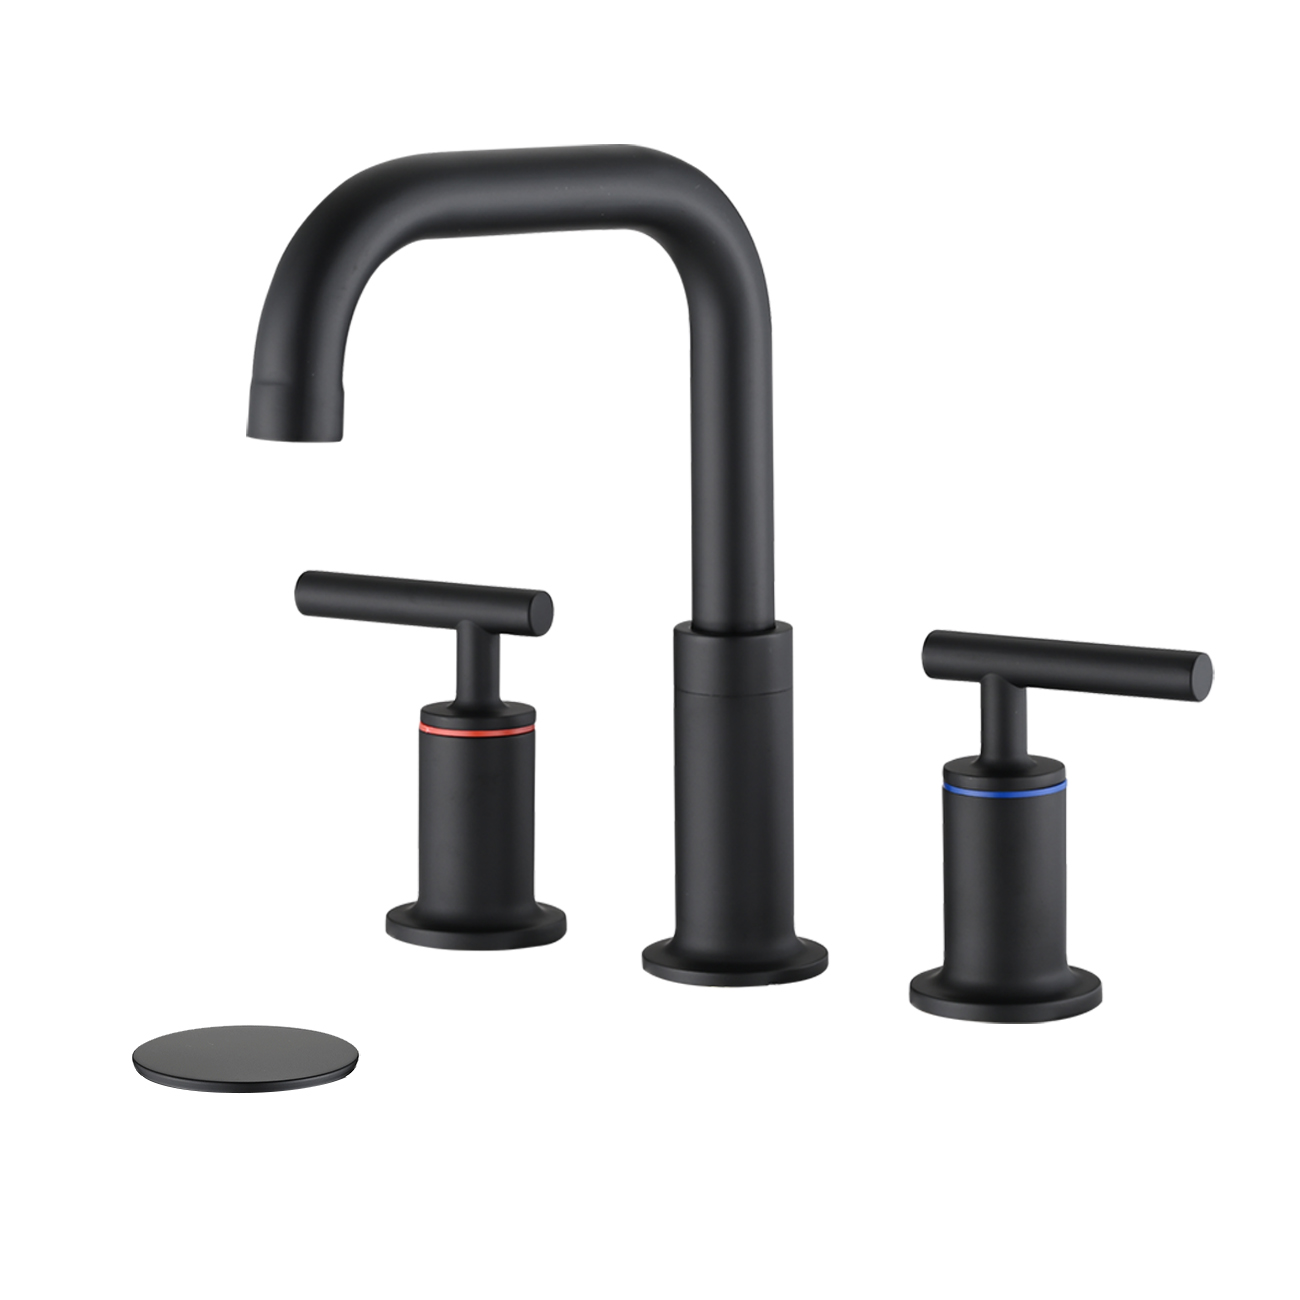 8 Inch Widespread Bathroom Sink Faucet with Pop-Up Drain